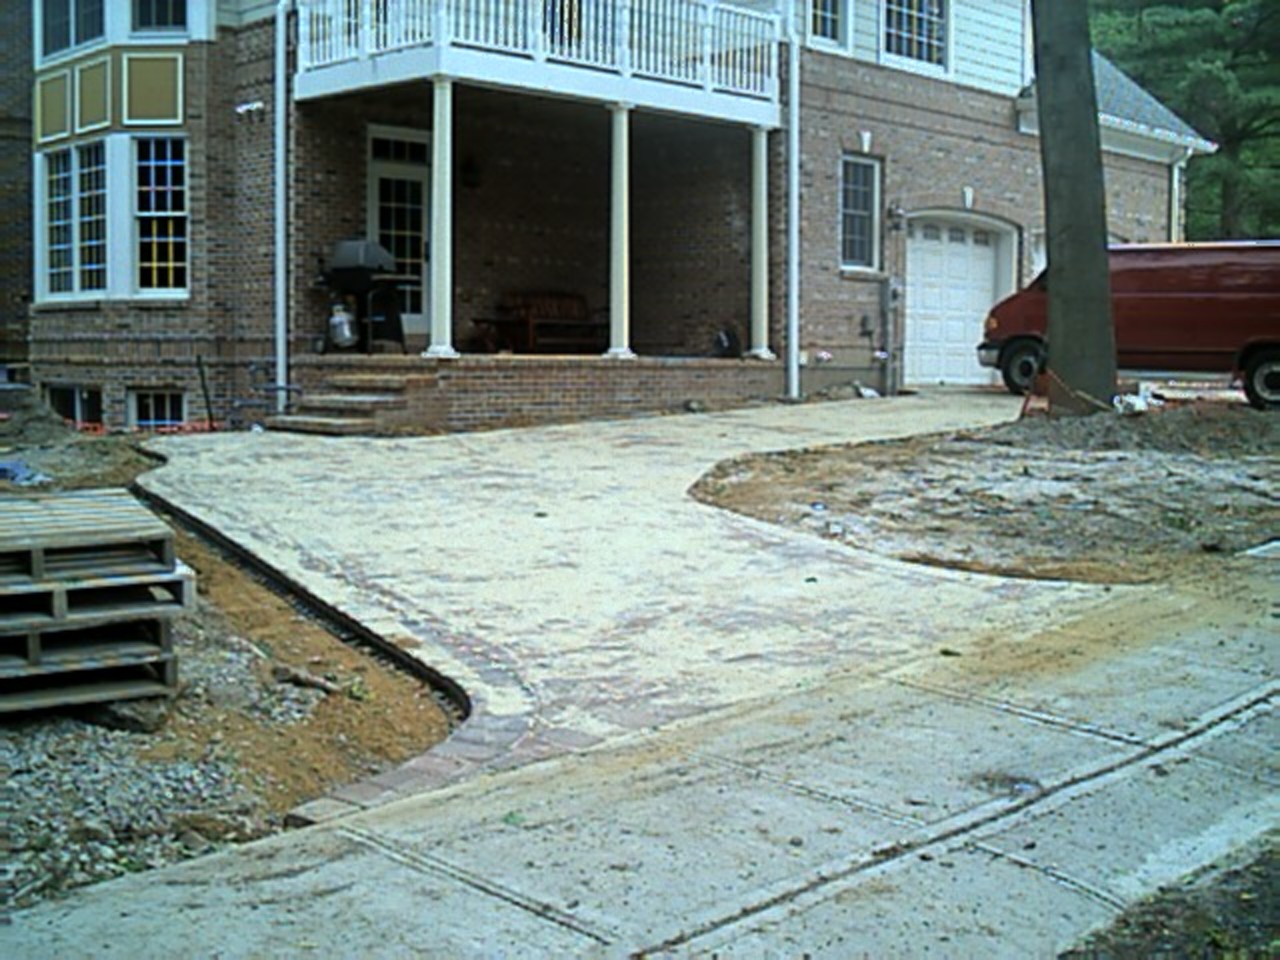 This is a view from the other entrance, the sand is being swept into the pavers.